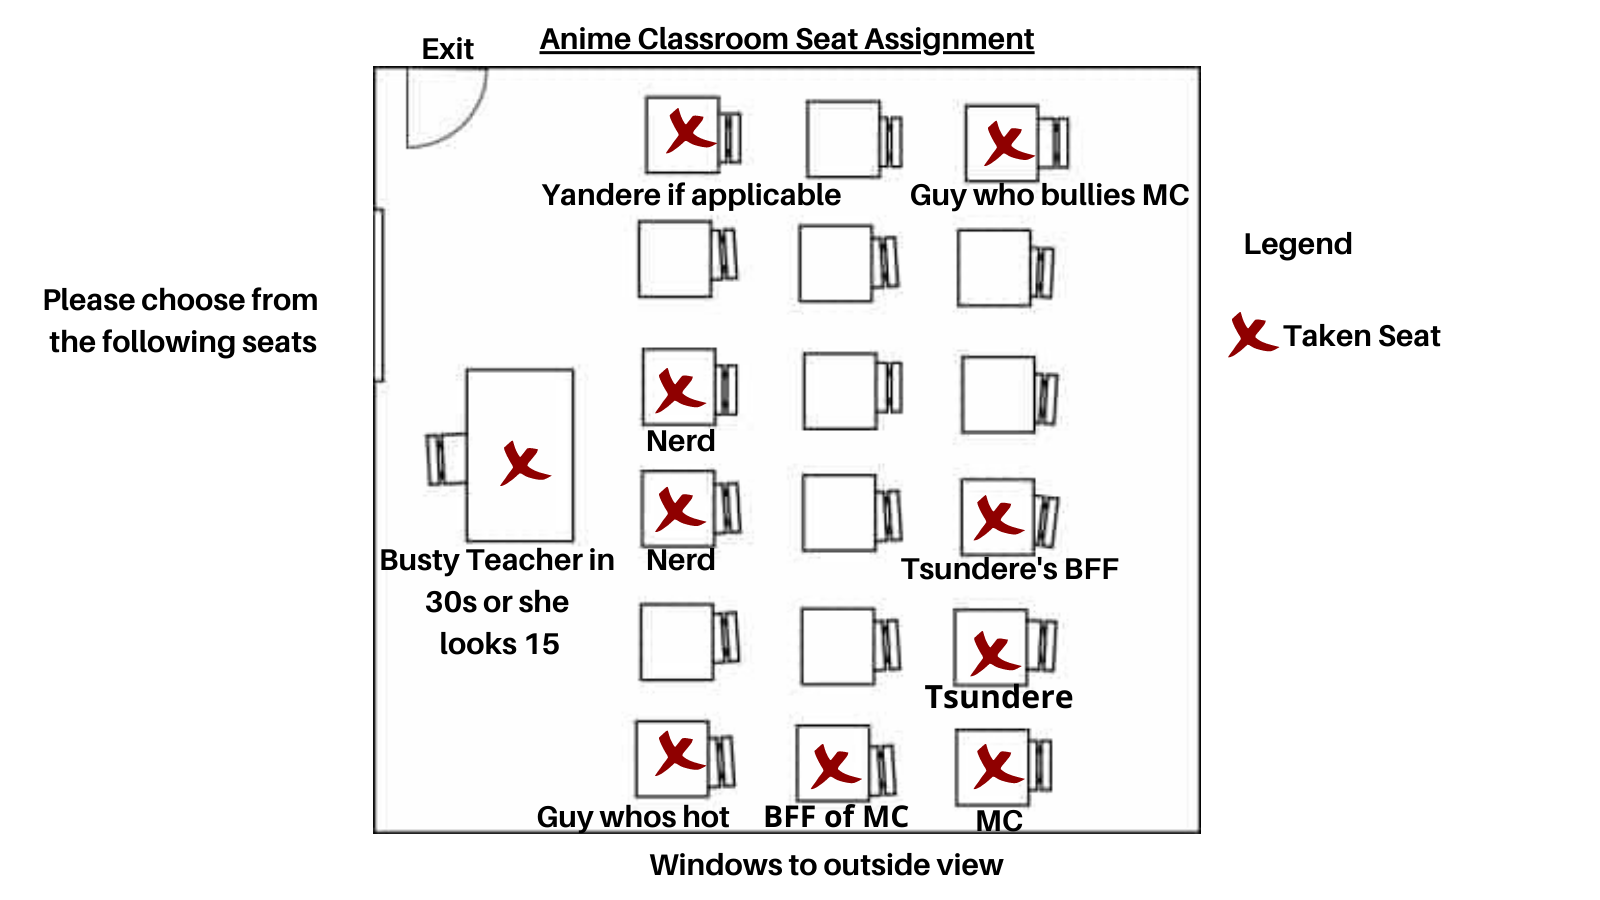 Where would you sit?